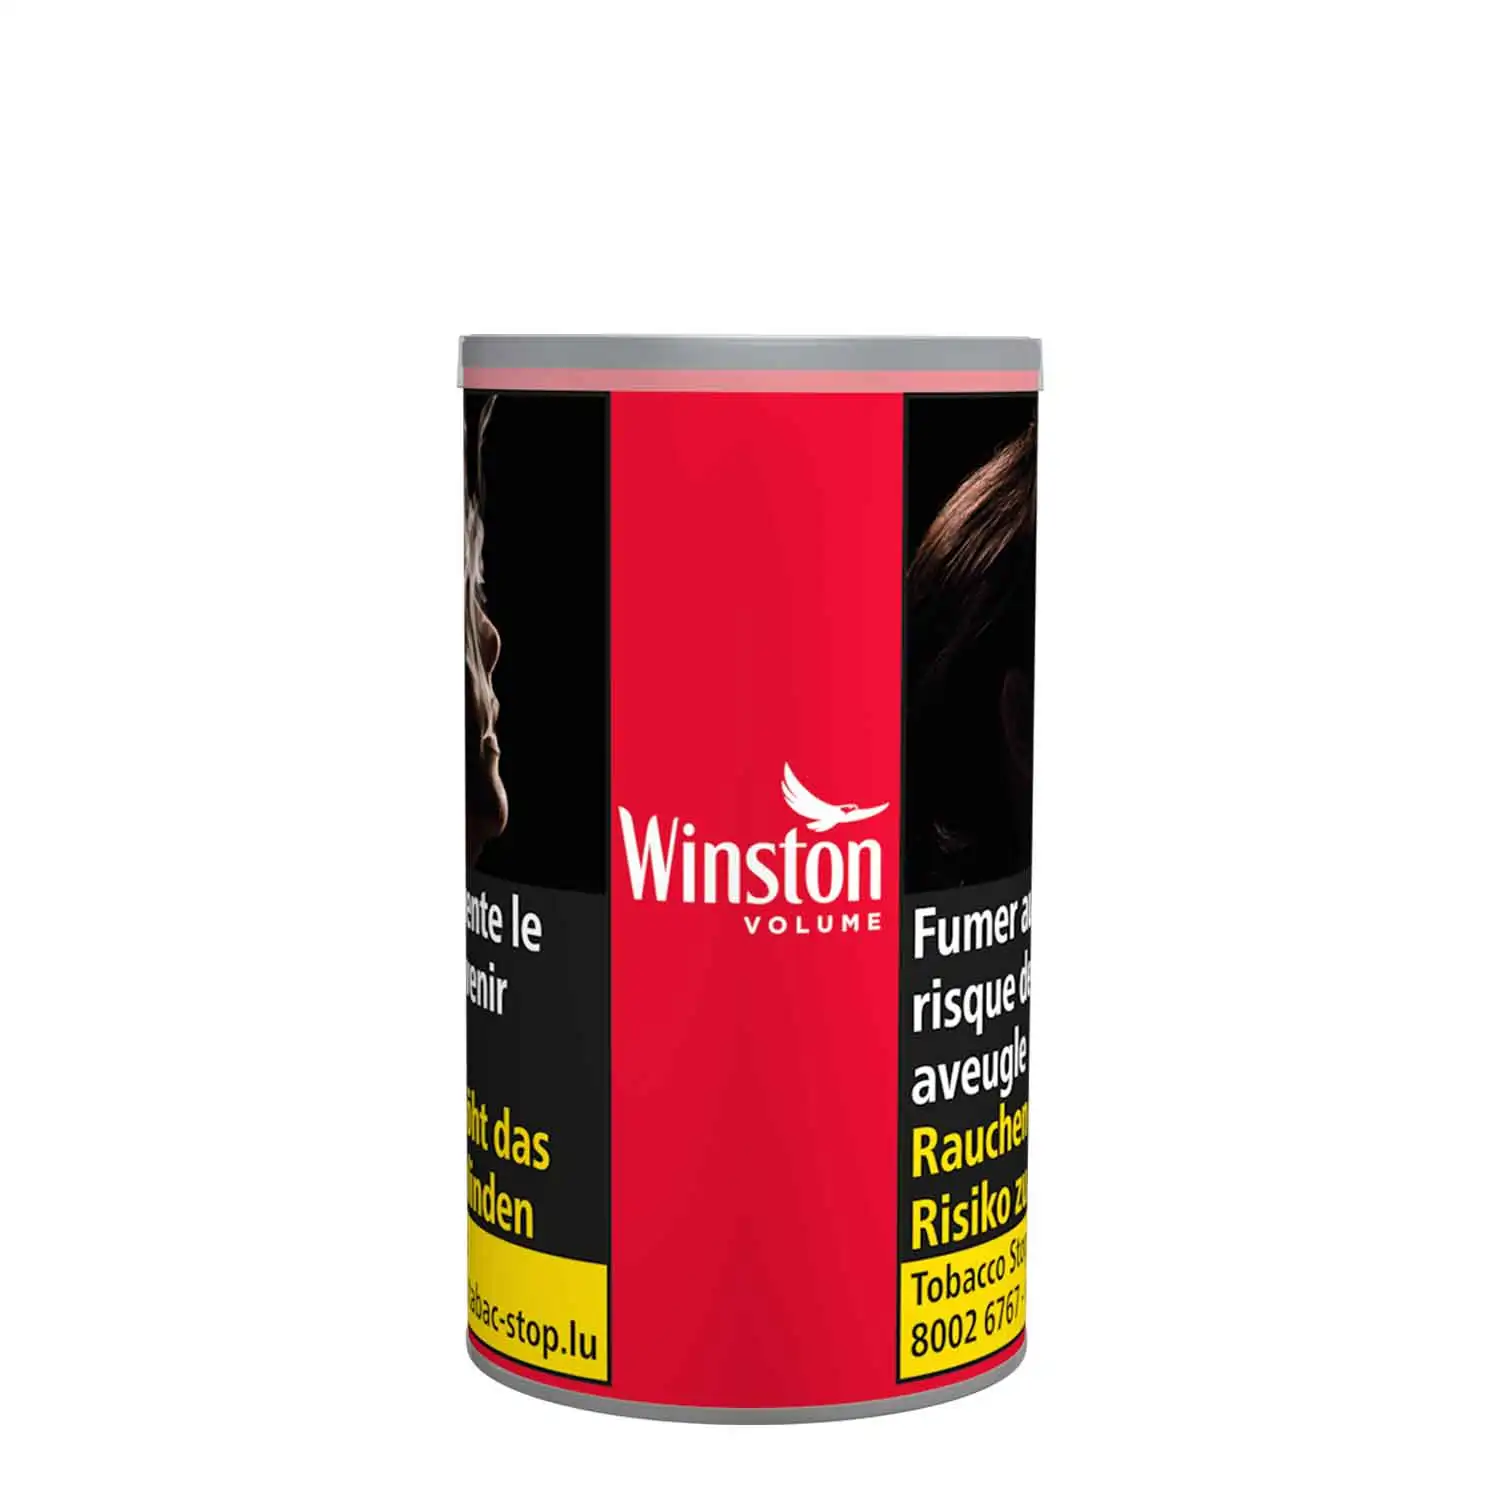 Winston volume red 100g - Buy at Real Tobacco